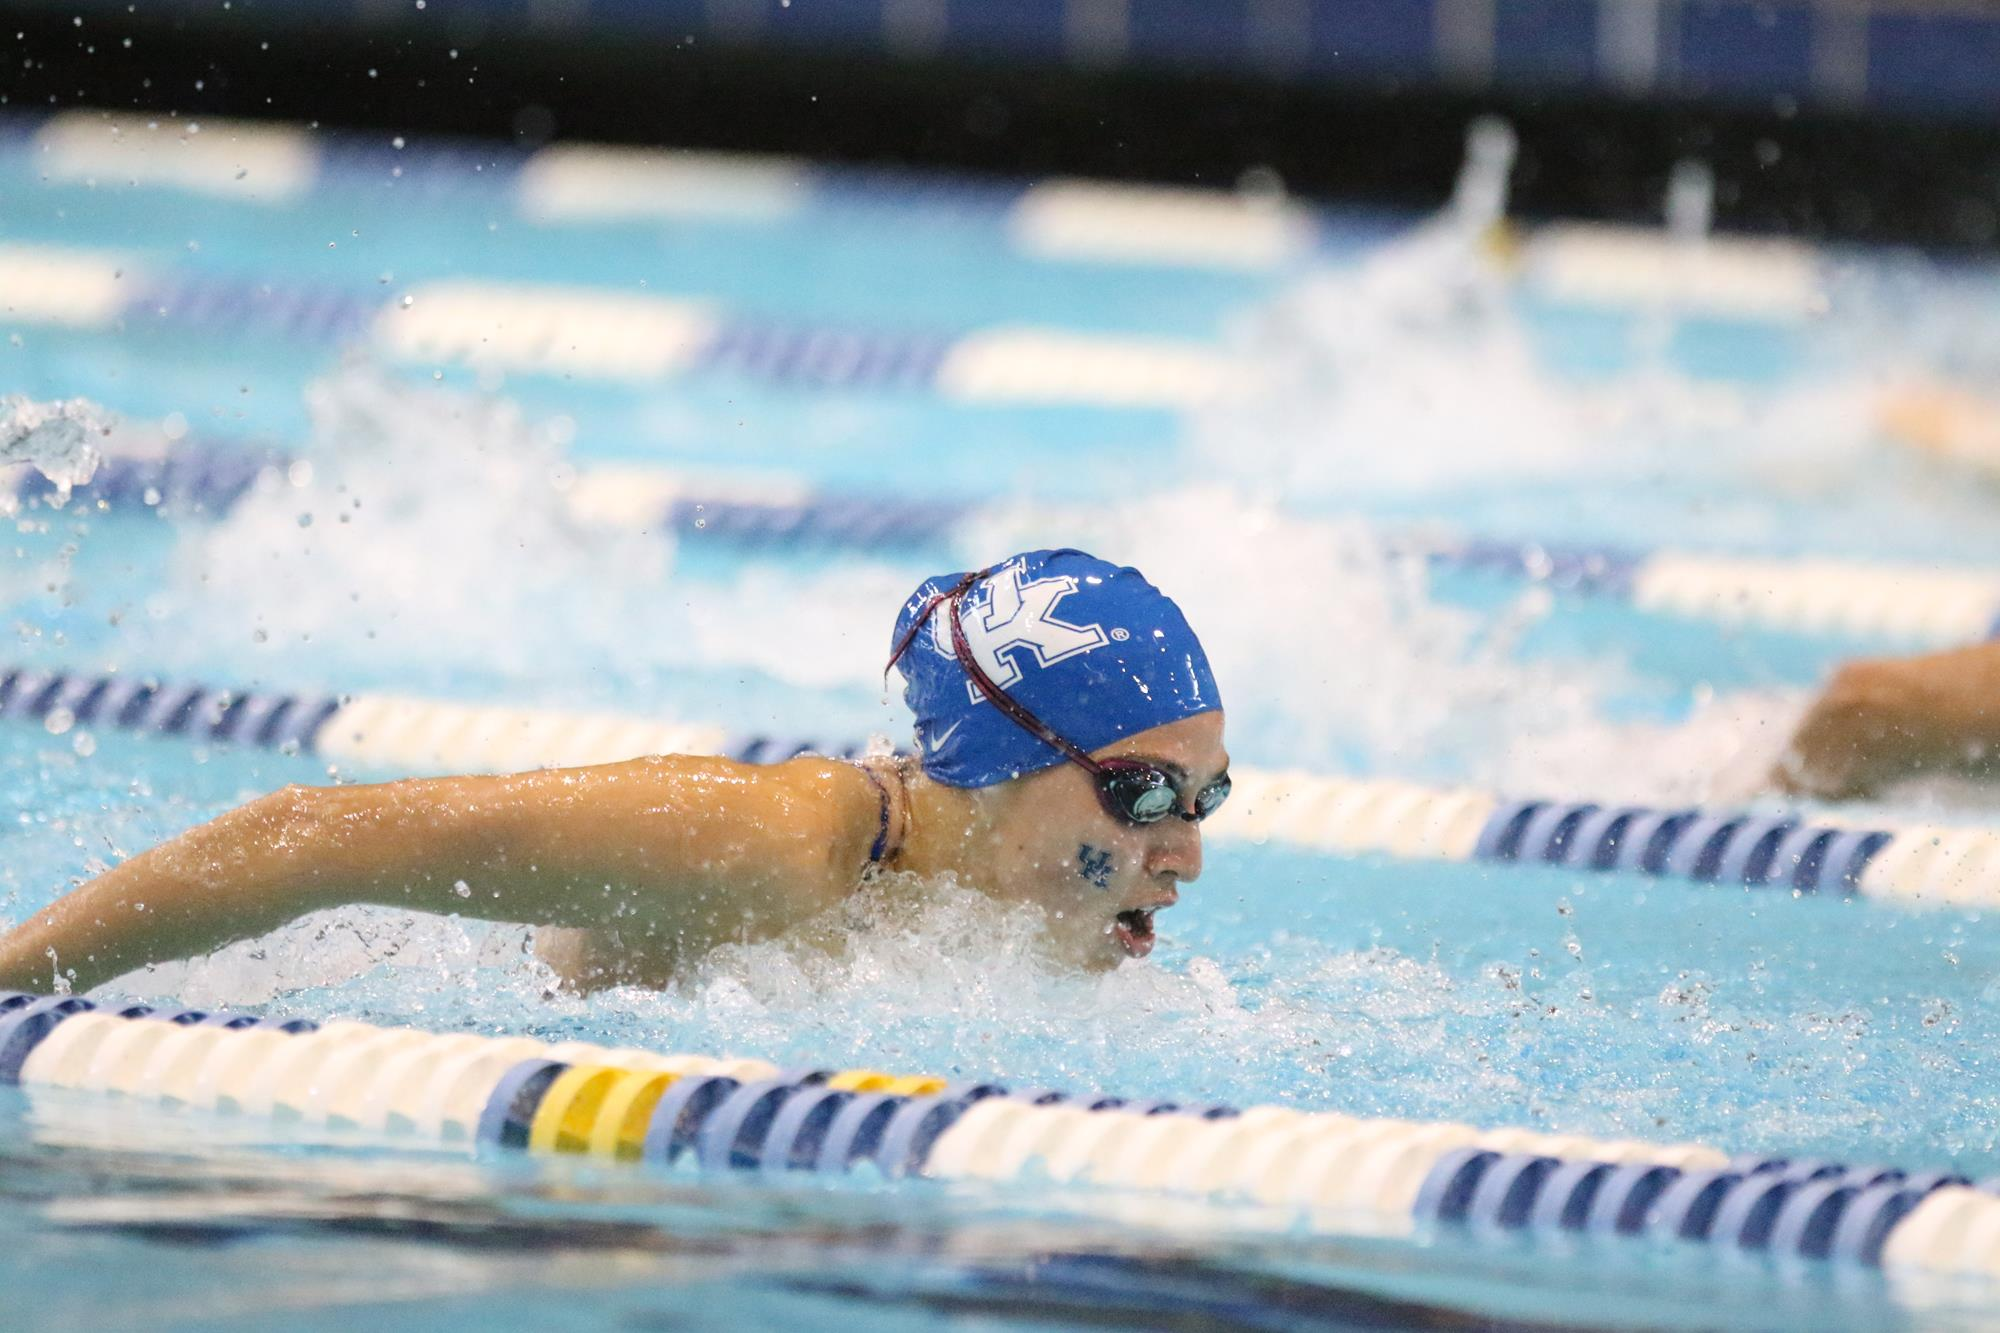 Kentucky Swimmer Seidt Hopes to Reach Olympic Dreams